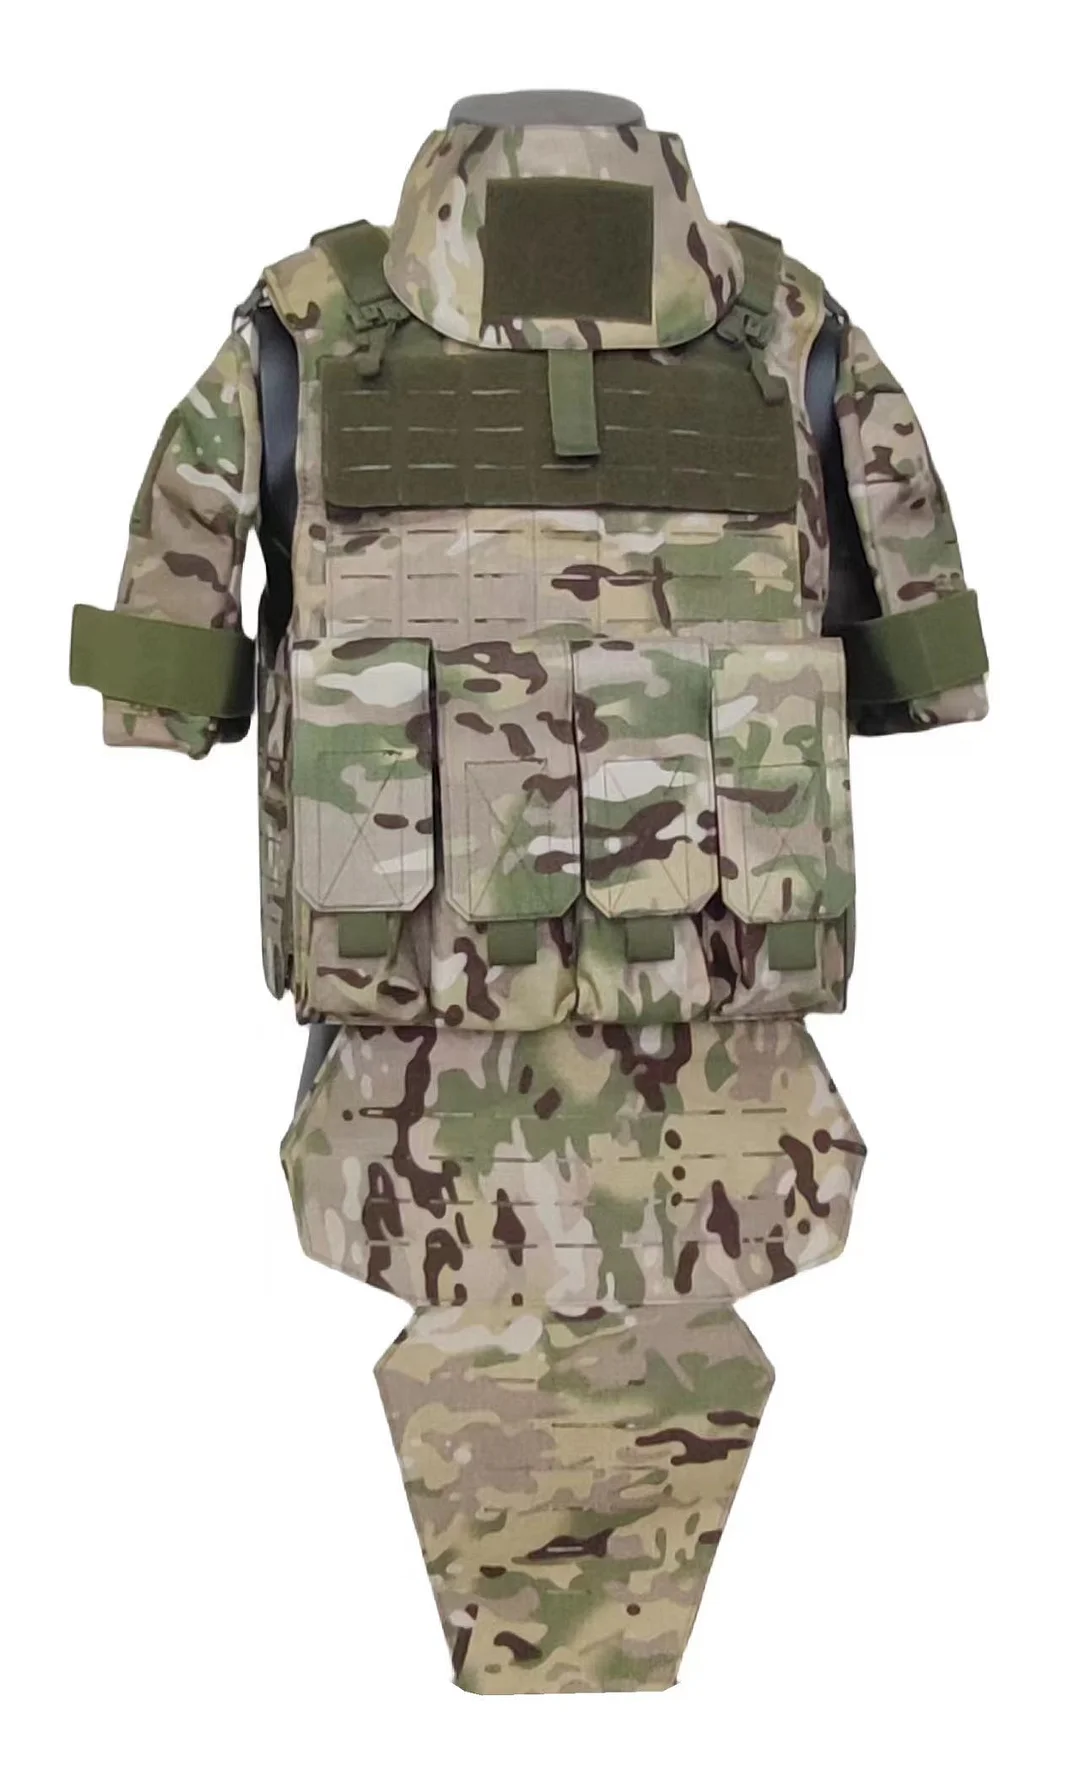 Full Protective Laser Button Level IV Body Armor for Soldiers and Police